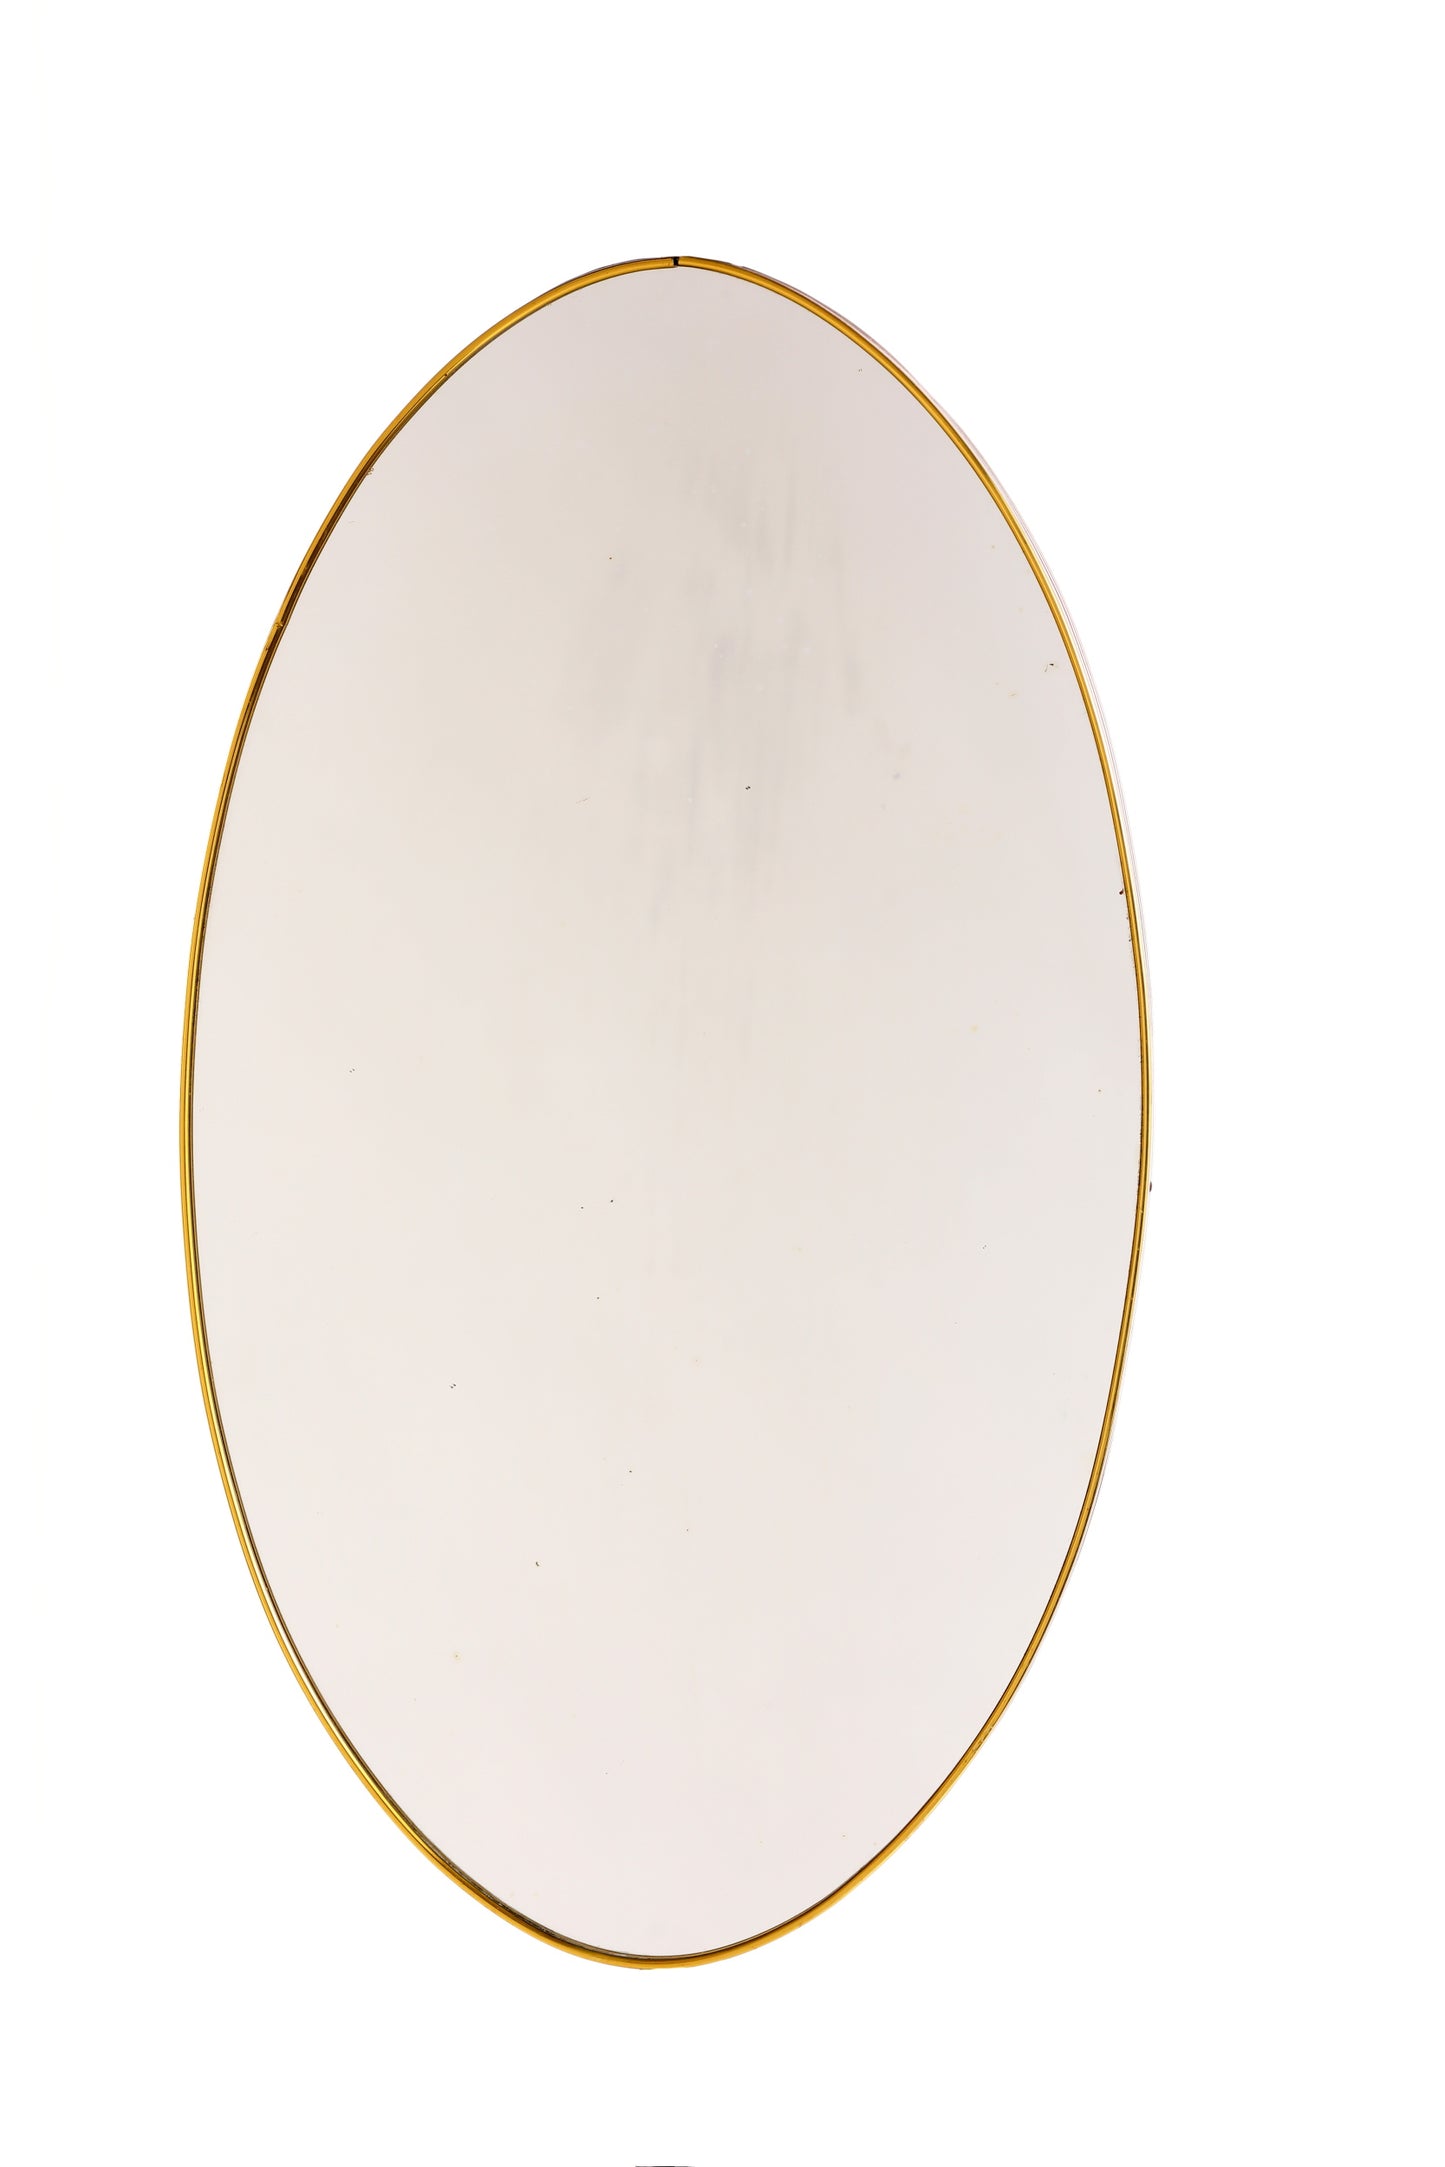 Oval 1950s metal and lucite mirror